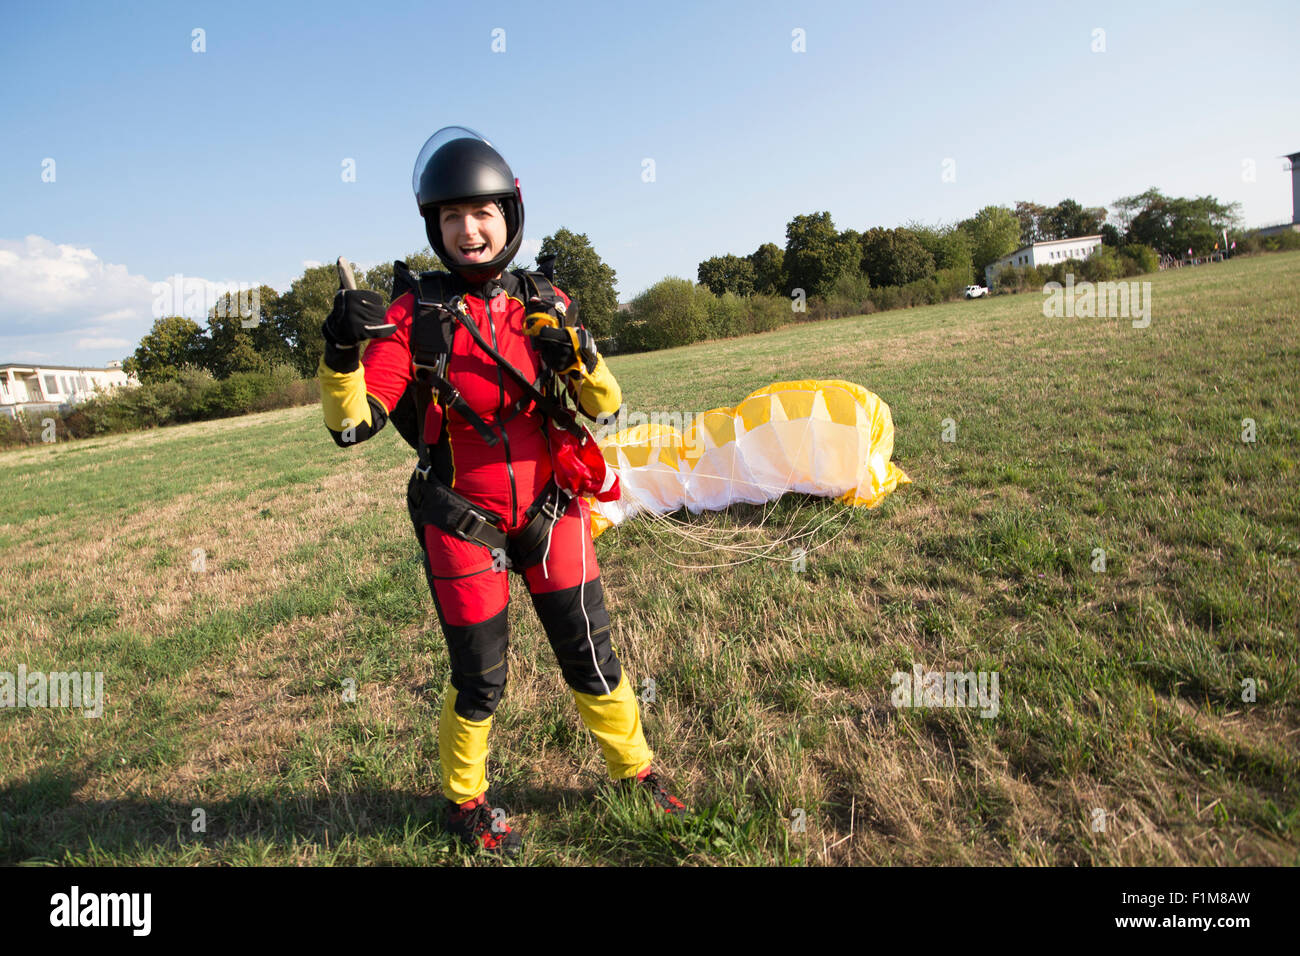 Freefly skydiver girl landed with her parachute and she is now very happy to be save back on the ground. Stock Photo